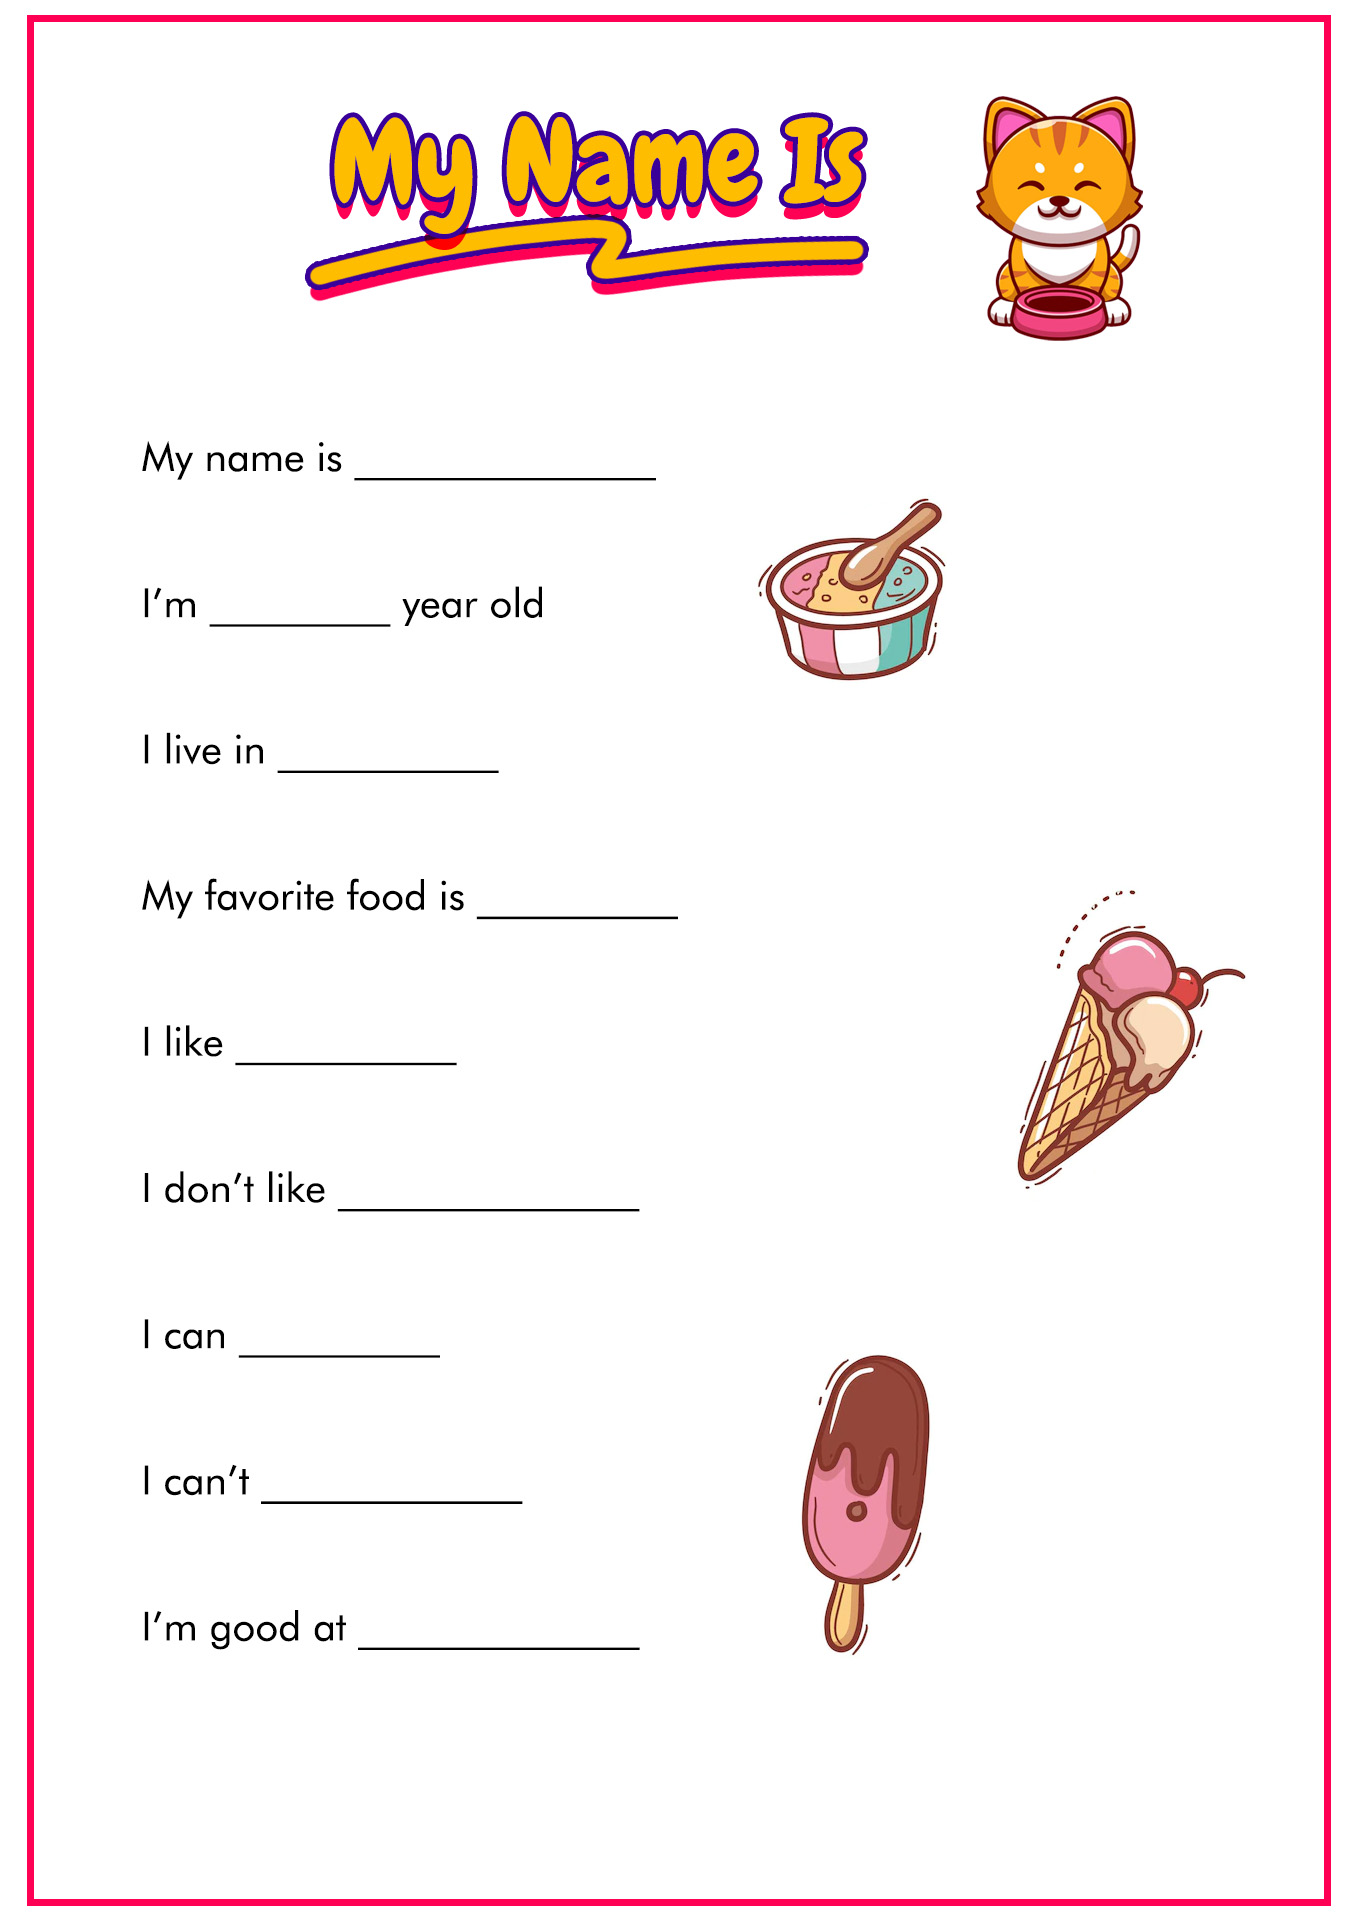 14-best-images-of-can-i-write-my-name-worksheet-write-your-name-worksheets-can-i-write-my